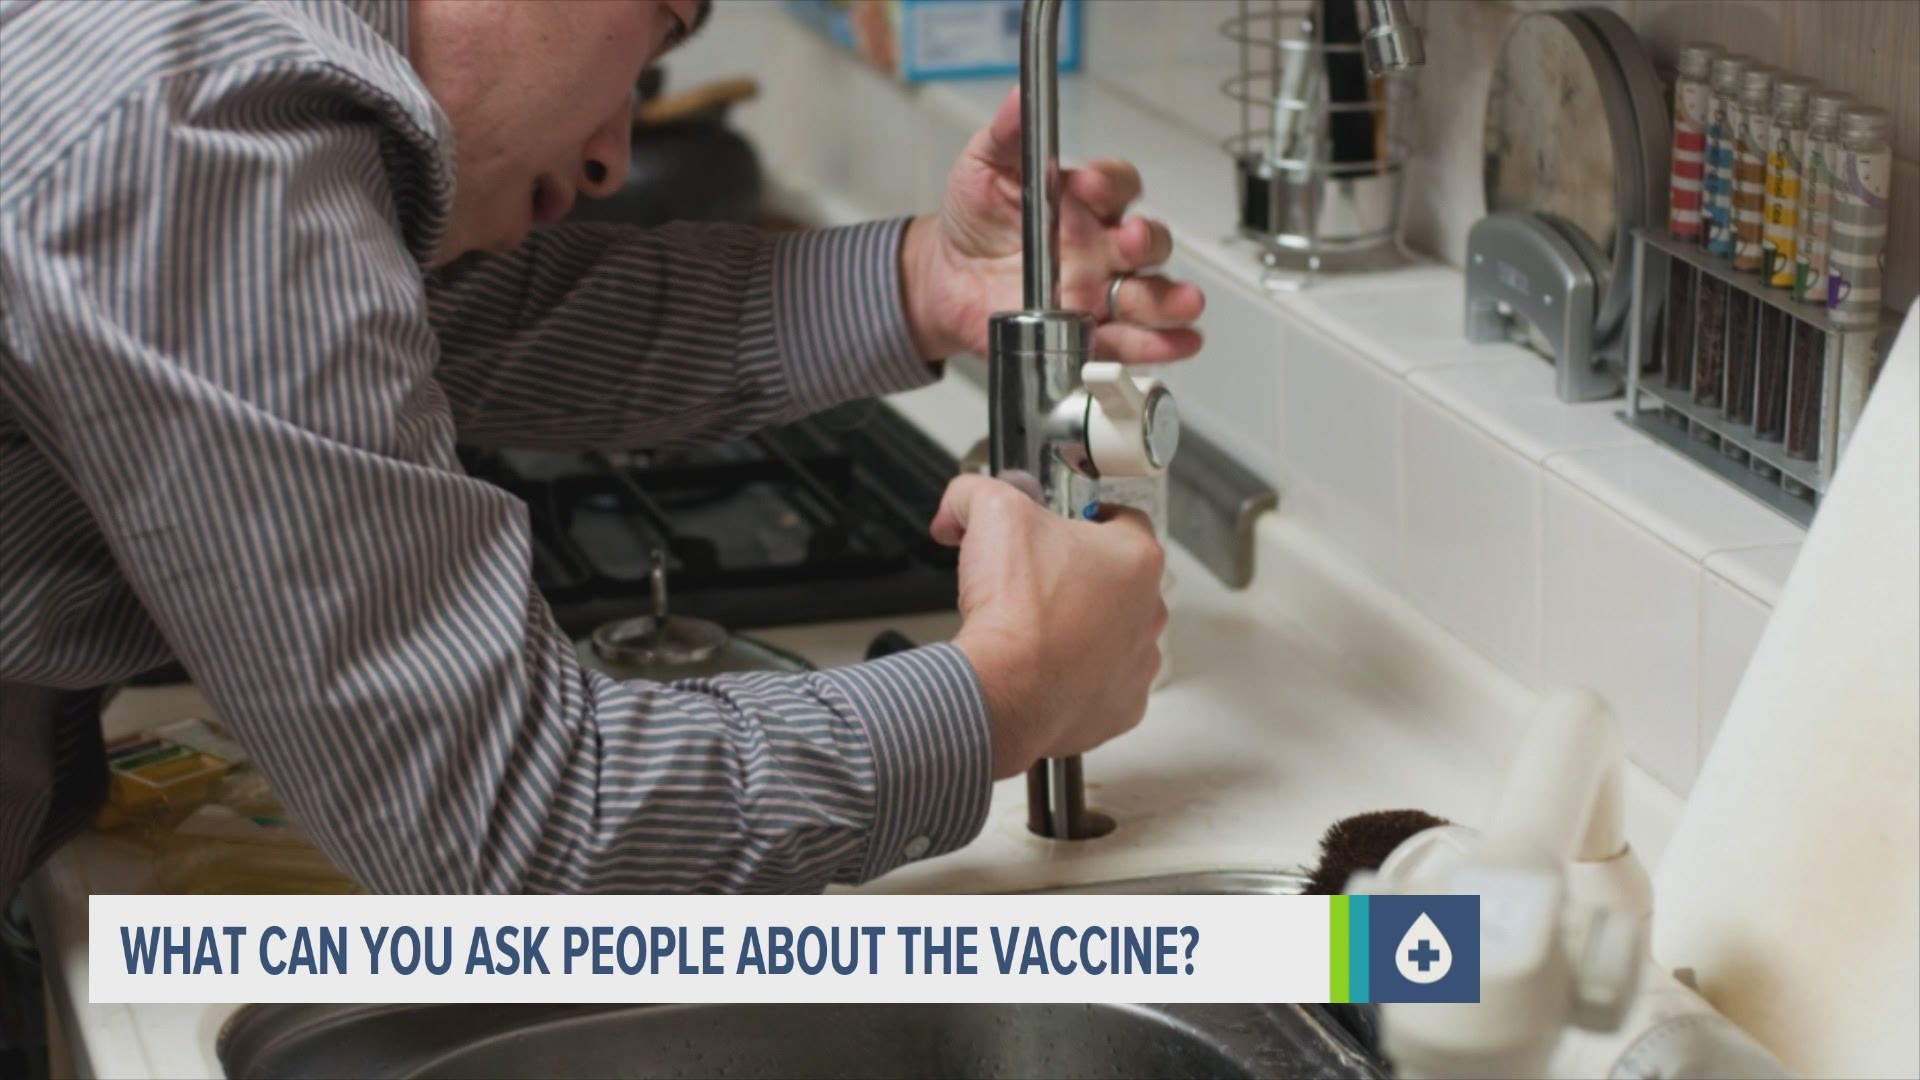 Homeowners have the right to ask a potential contractor or anyone else who works inside their home if they've been vaccinated or to wear a face covering.